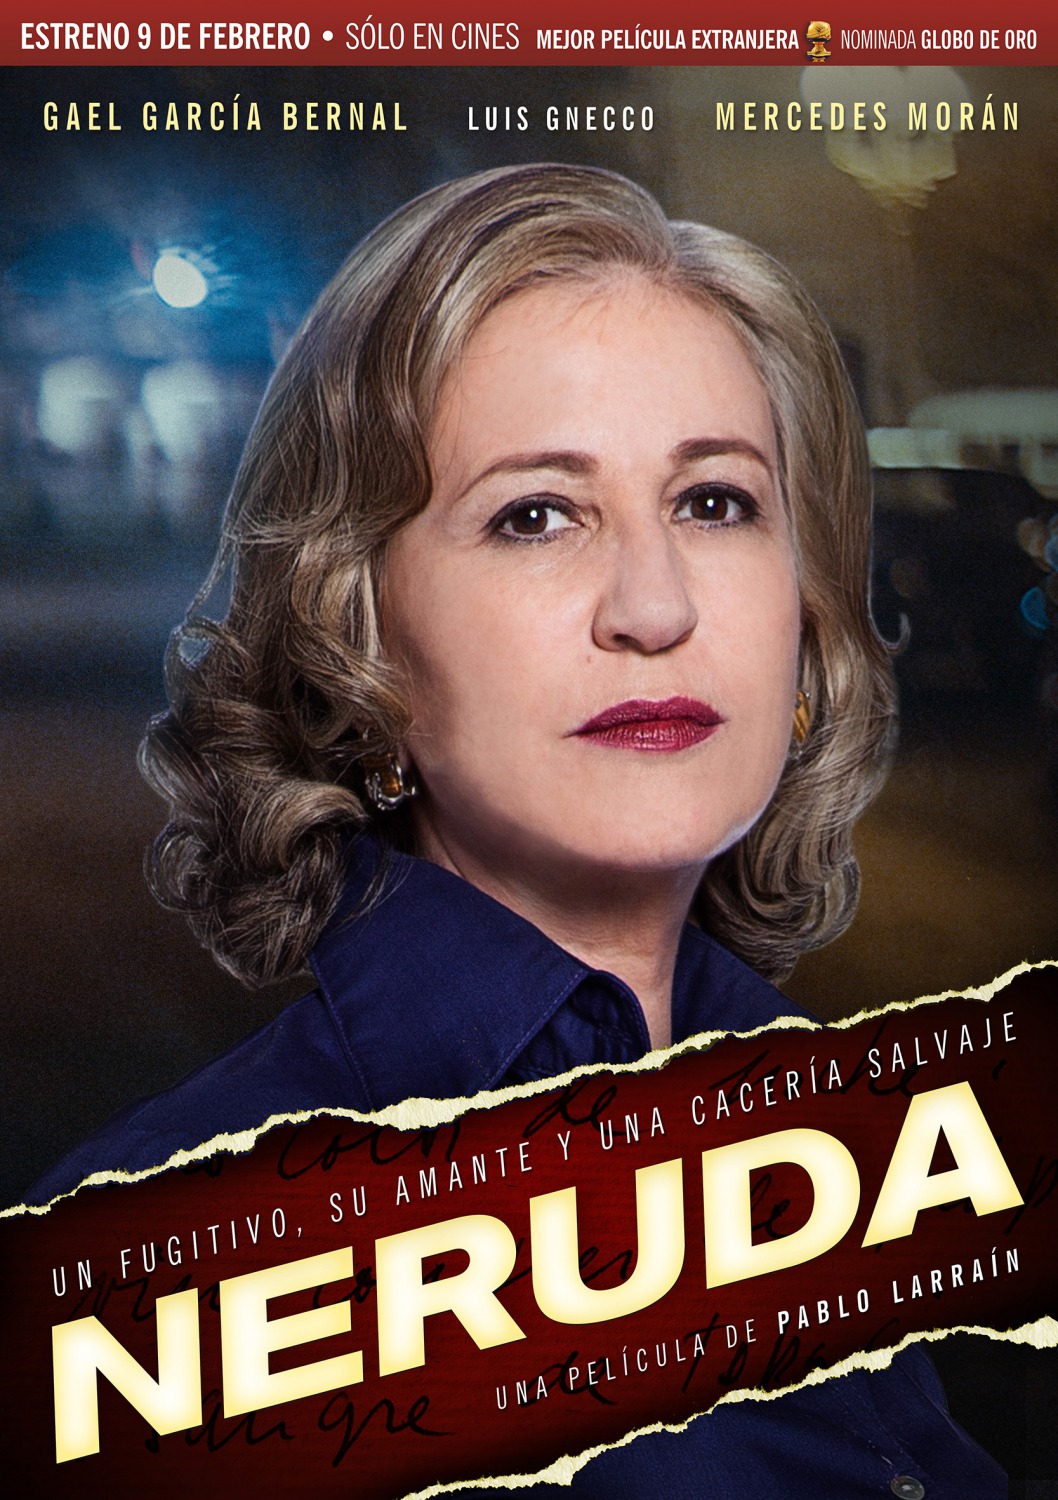 Extra Large Movie Poster Image for Neruda (#9 of 9)